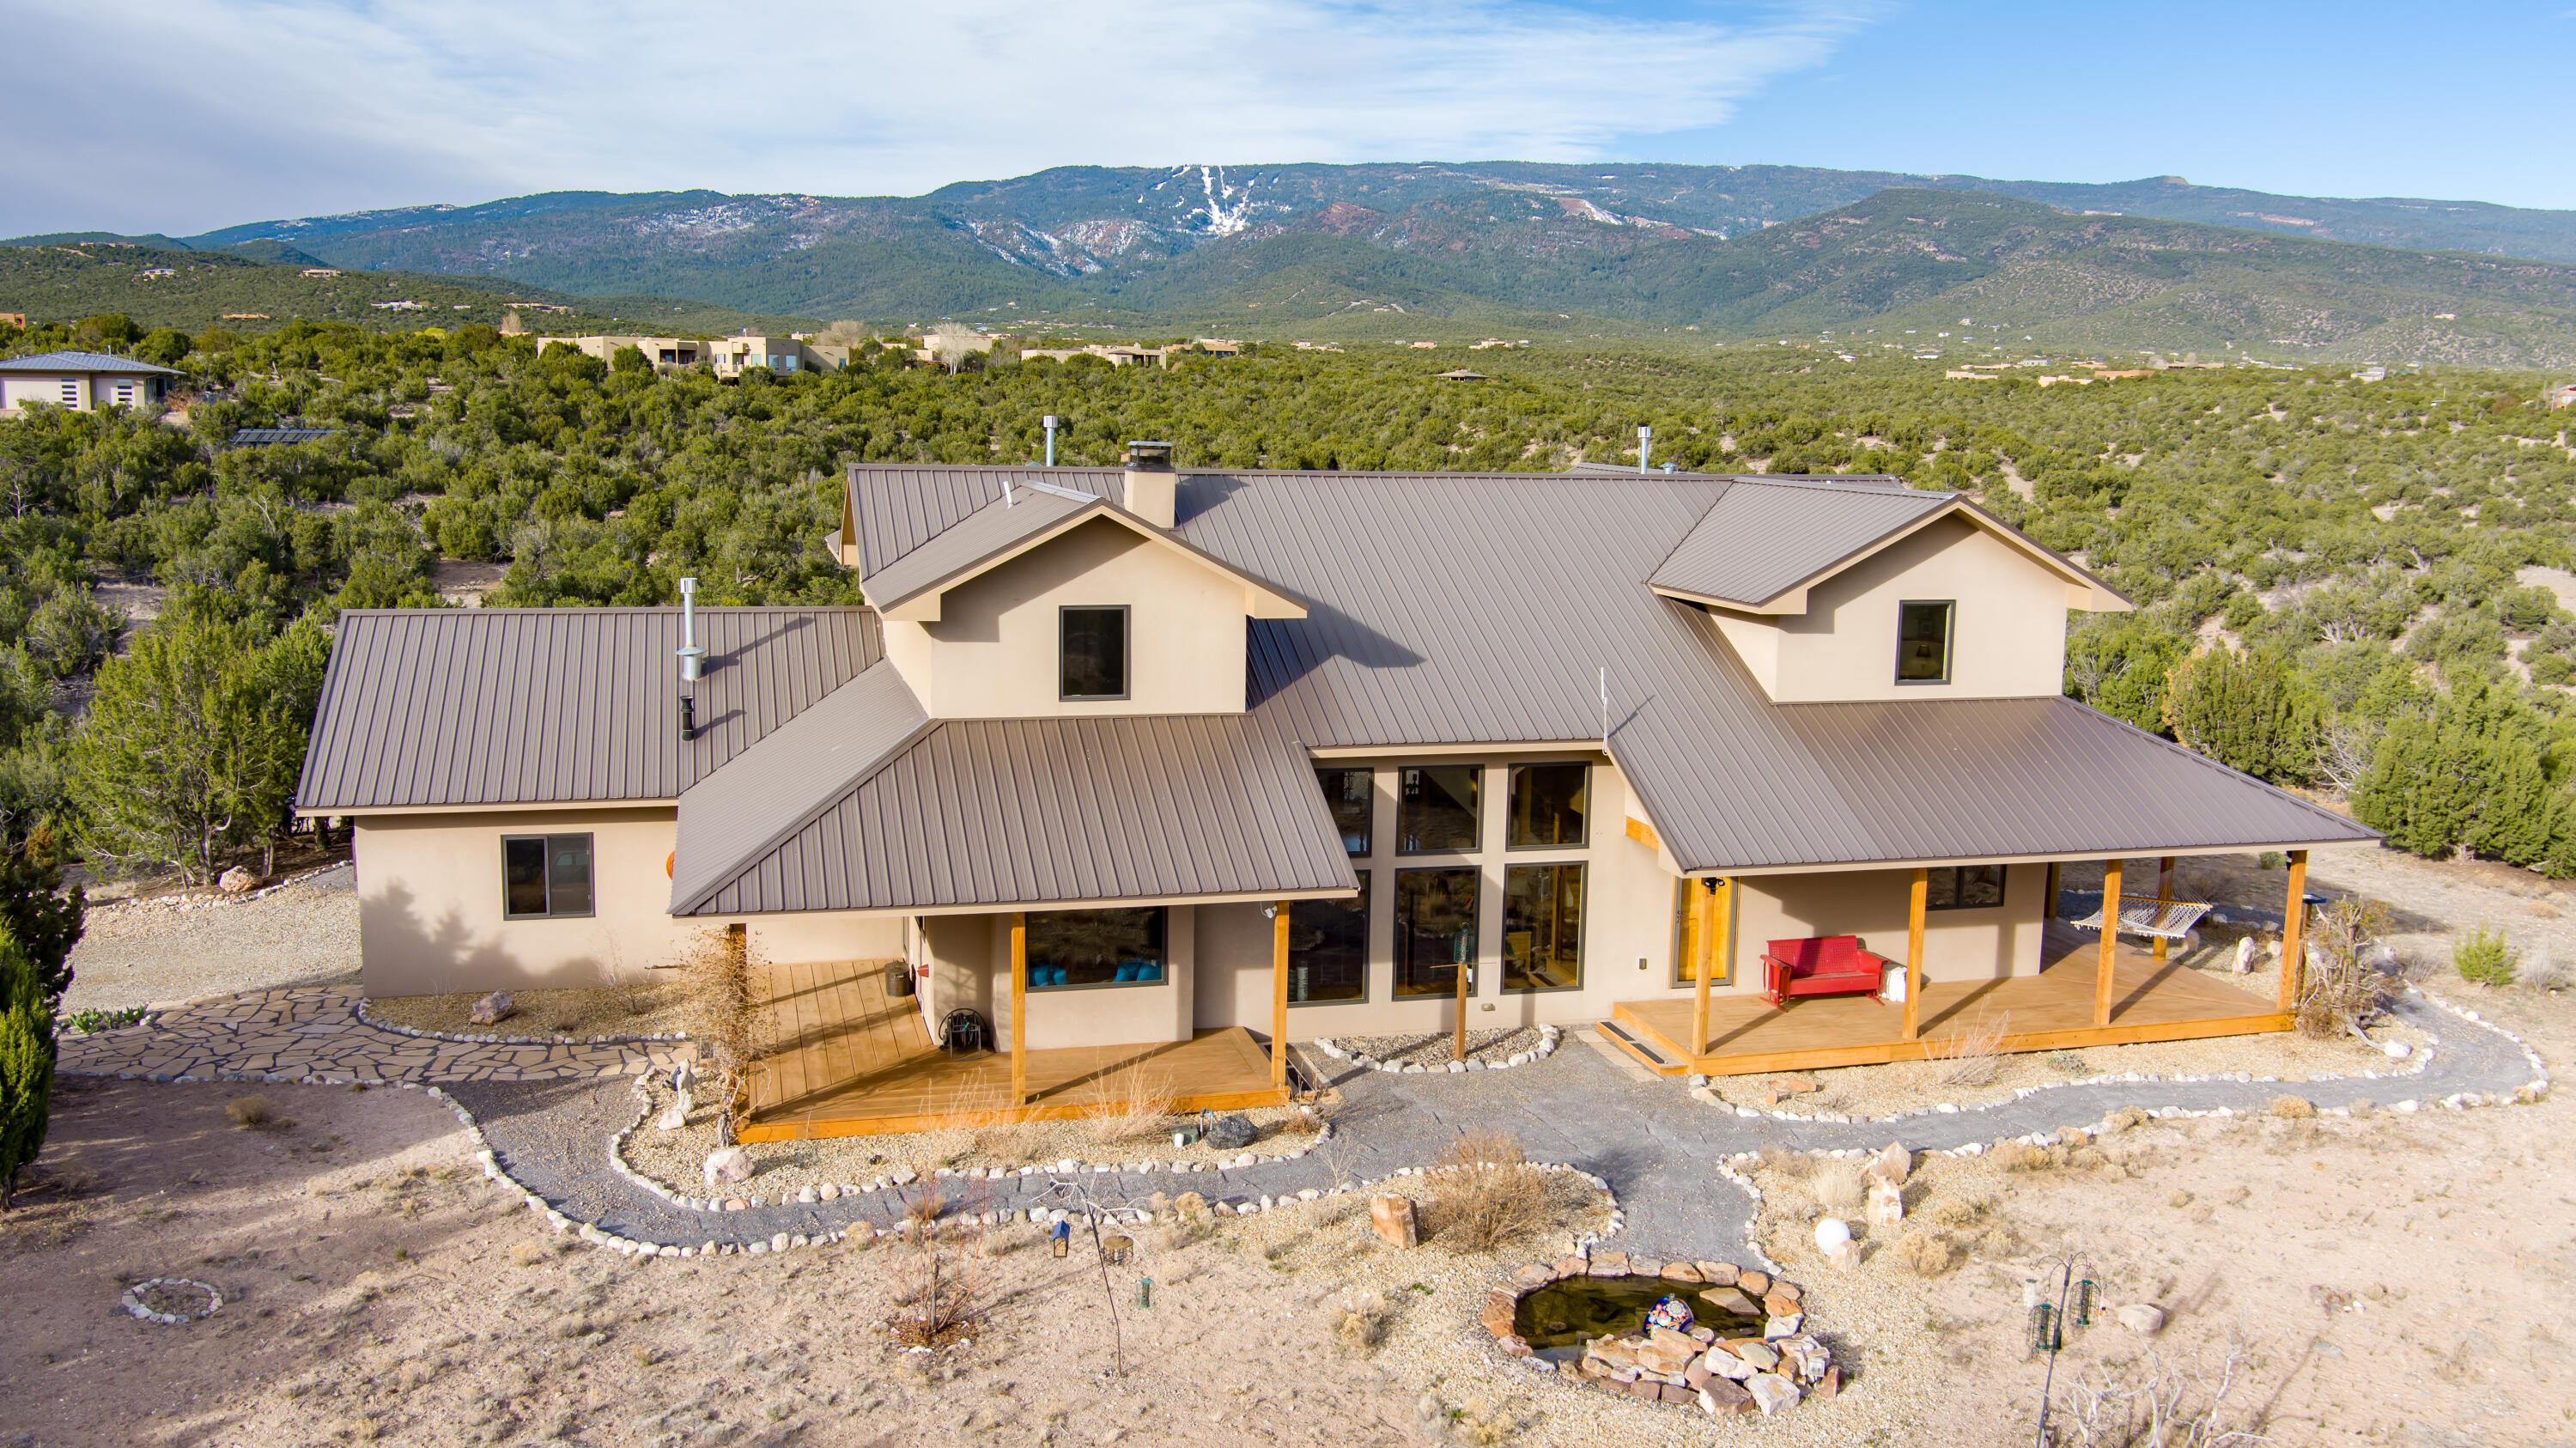 Welcome to your dream Northern New Mexico Style home on 10+acres of pristine land! This fully-integrated smart home features a wrap-around porch where you can enjoy the breathtaking views of the surrounding mountains and landscape. Step inside to an open floor plan with beamed ceilings and stunning Alabama poplar wood floors that create a warm and inviting atmosphere. The living room boasts a locally quarried 2-way stone fireplace and oversized windows. The updated gourmet kitchen has a copper farmhouse sink, granite countertops, top-of-the-line appliances, customized cabinets with special pull-out drawers. 4 bedrooms with the primary on the main floor and the loft/gym has a built-in Murphy bed. Pella wood frame windows. Outside you'll... (con't)